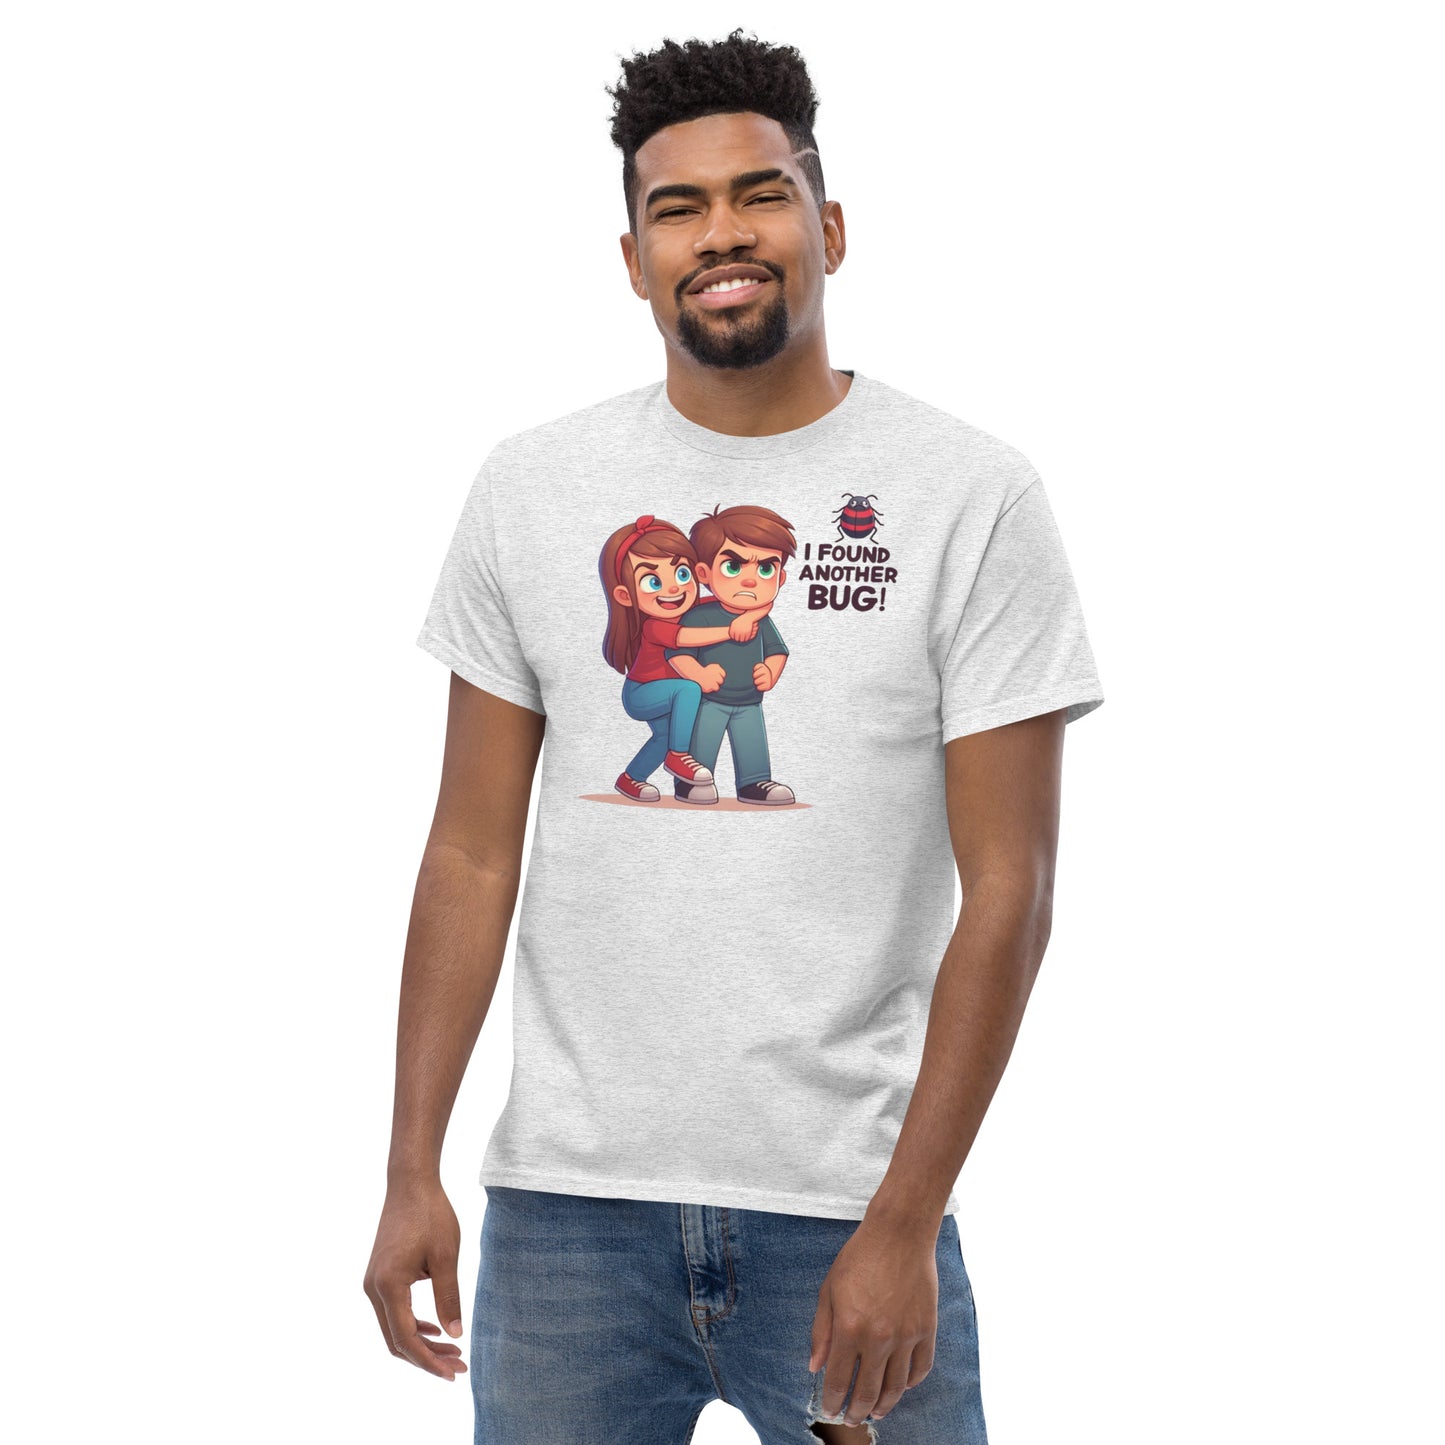 Found Another Bug classic tee